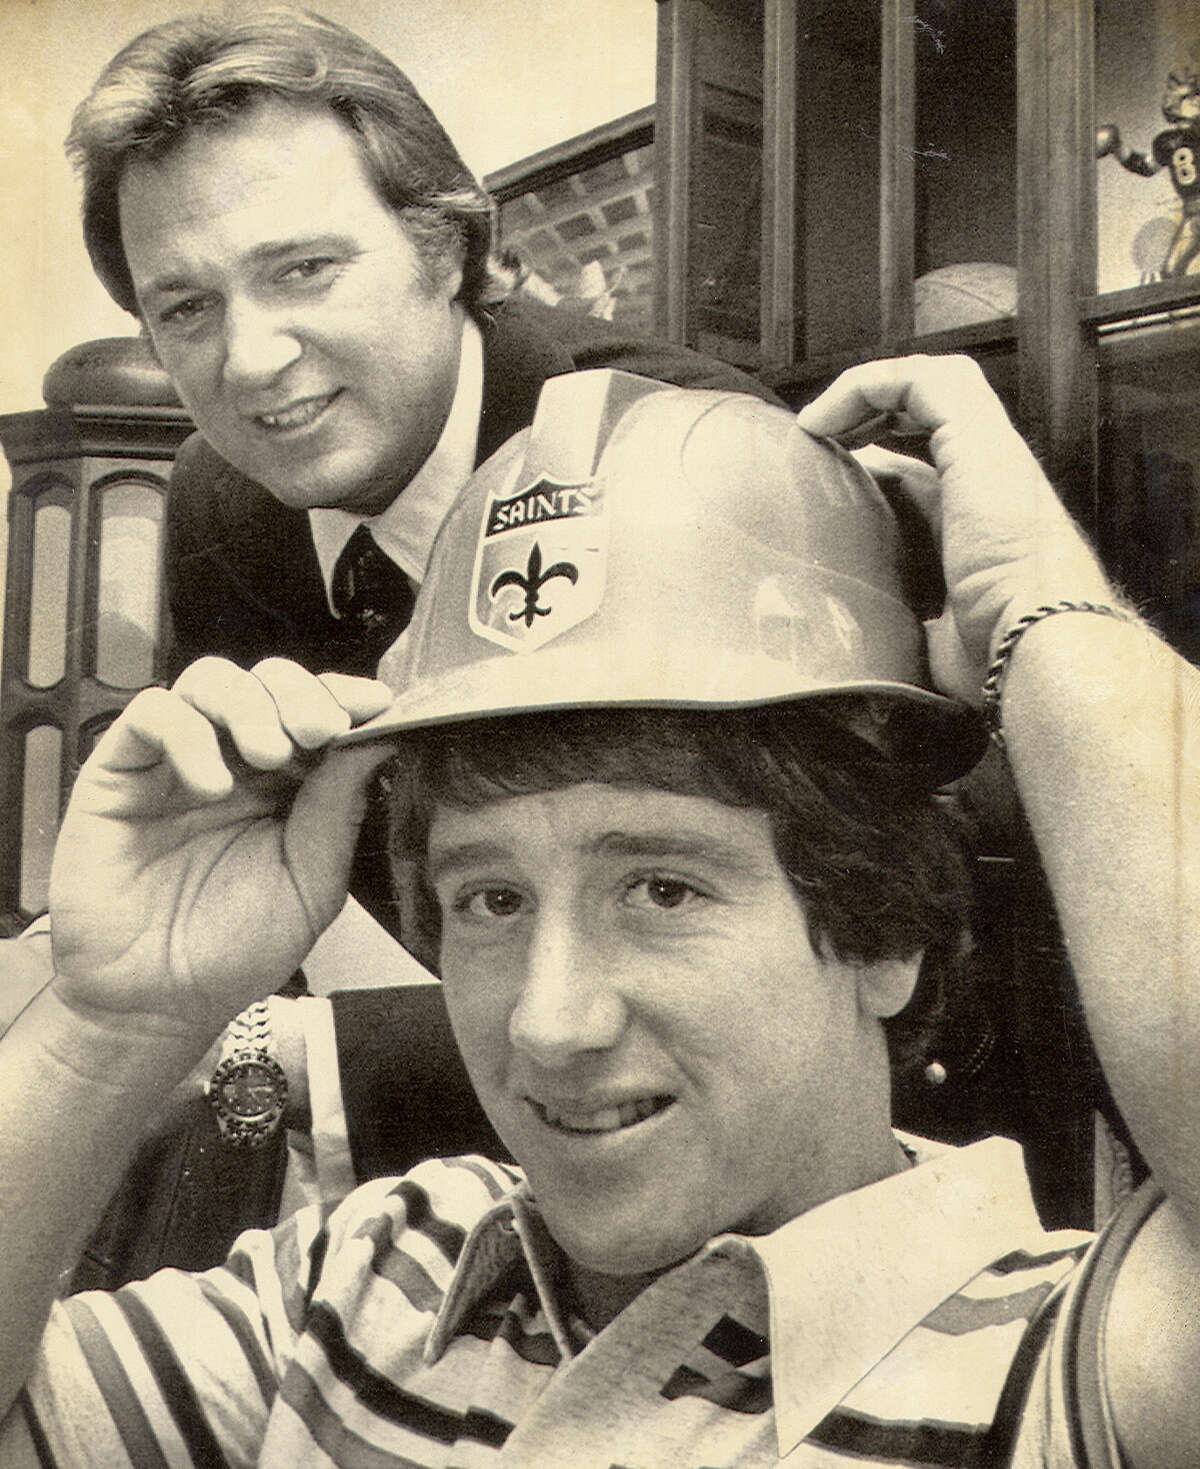 Saints Quarterback Archie Manning in 1975 after signing a new 5 year contract with the team. Behind him is owner John Mecom Jr.